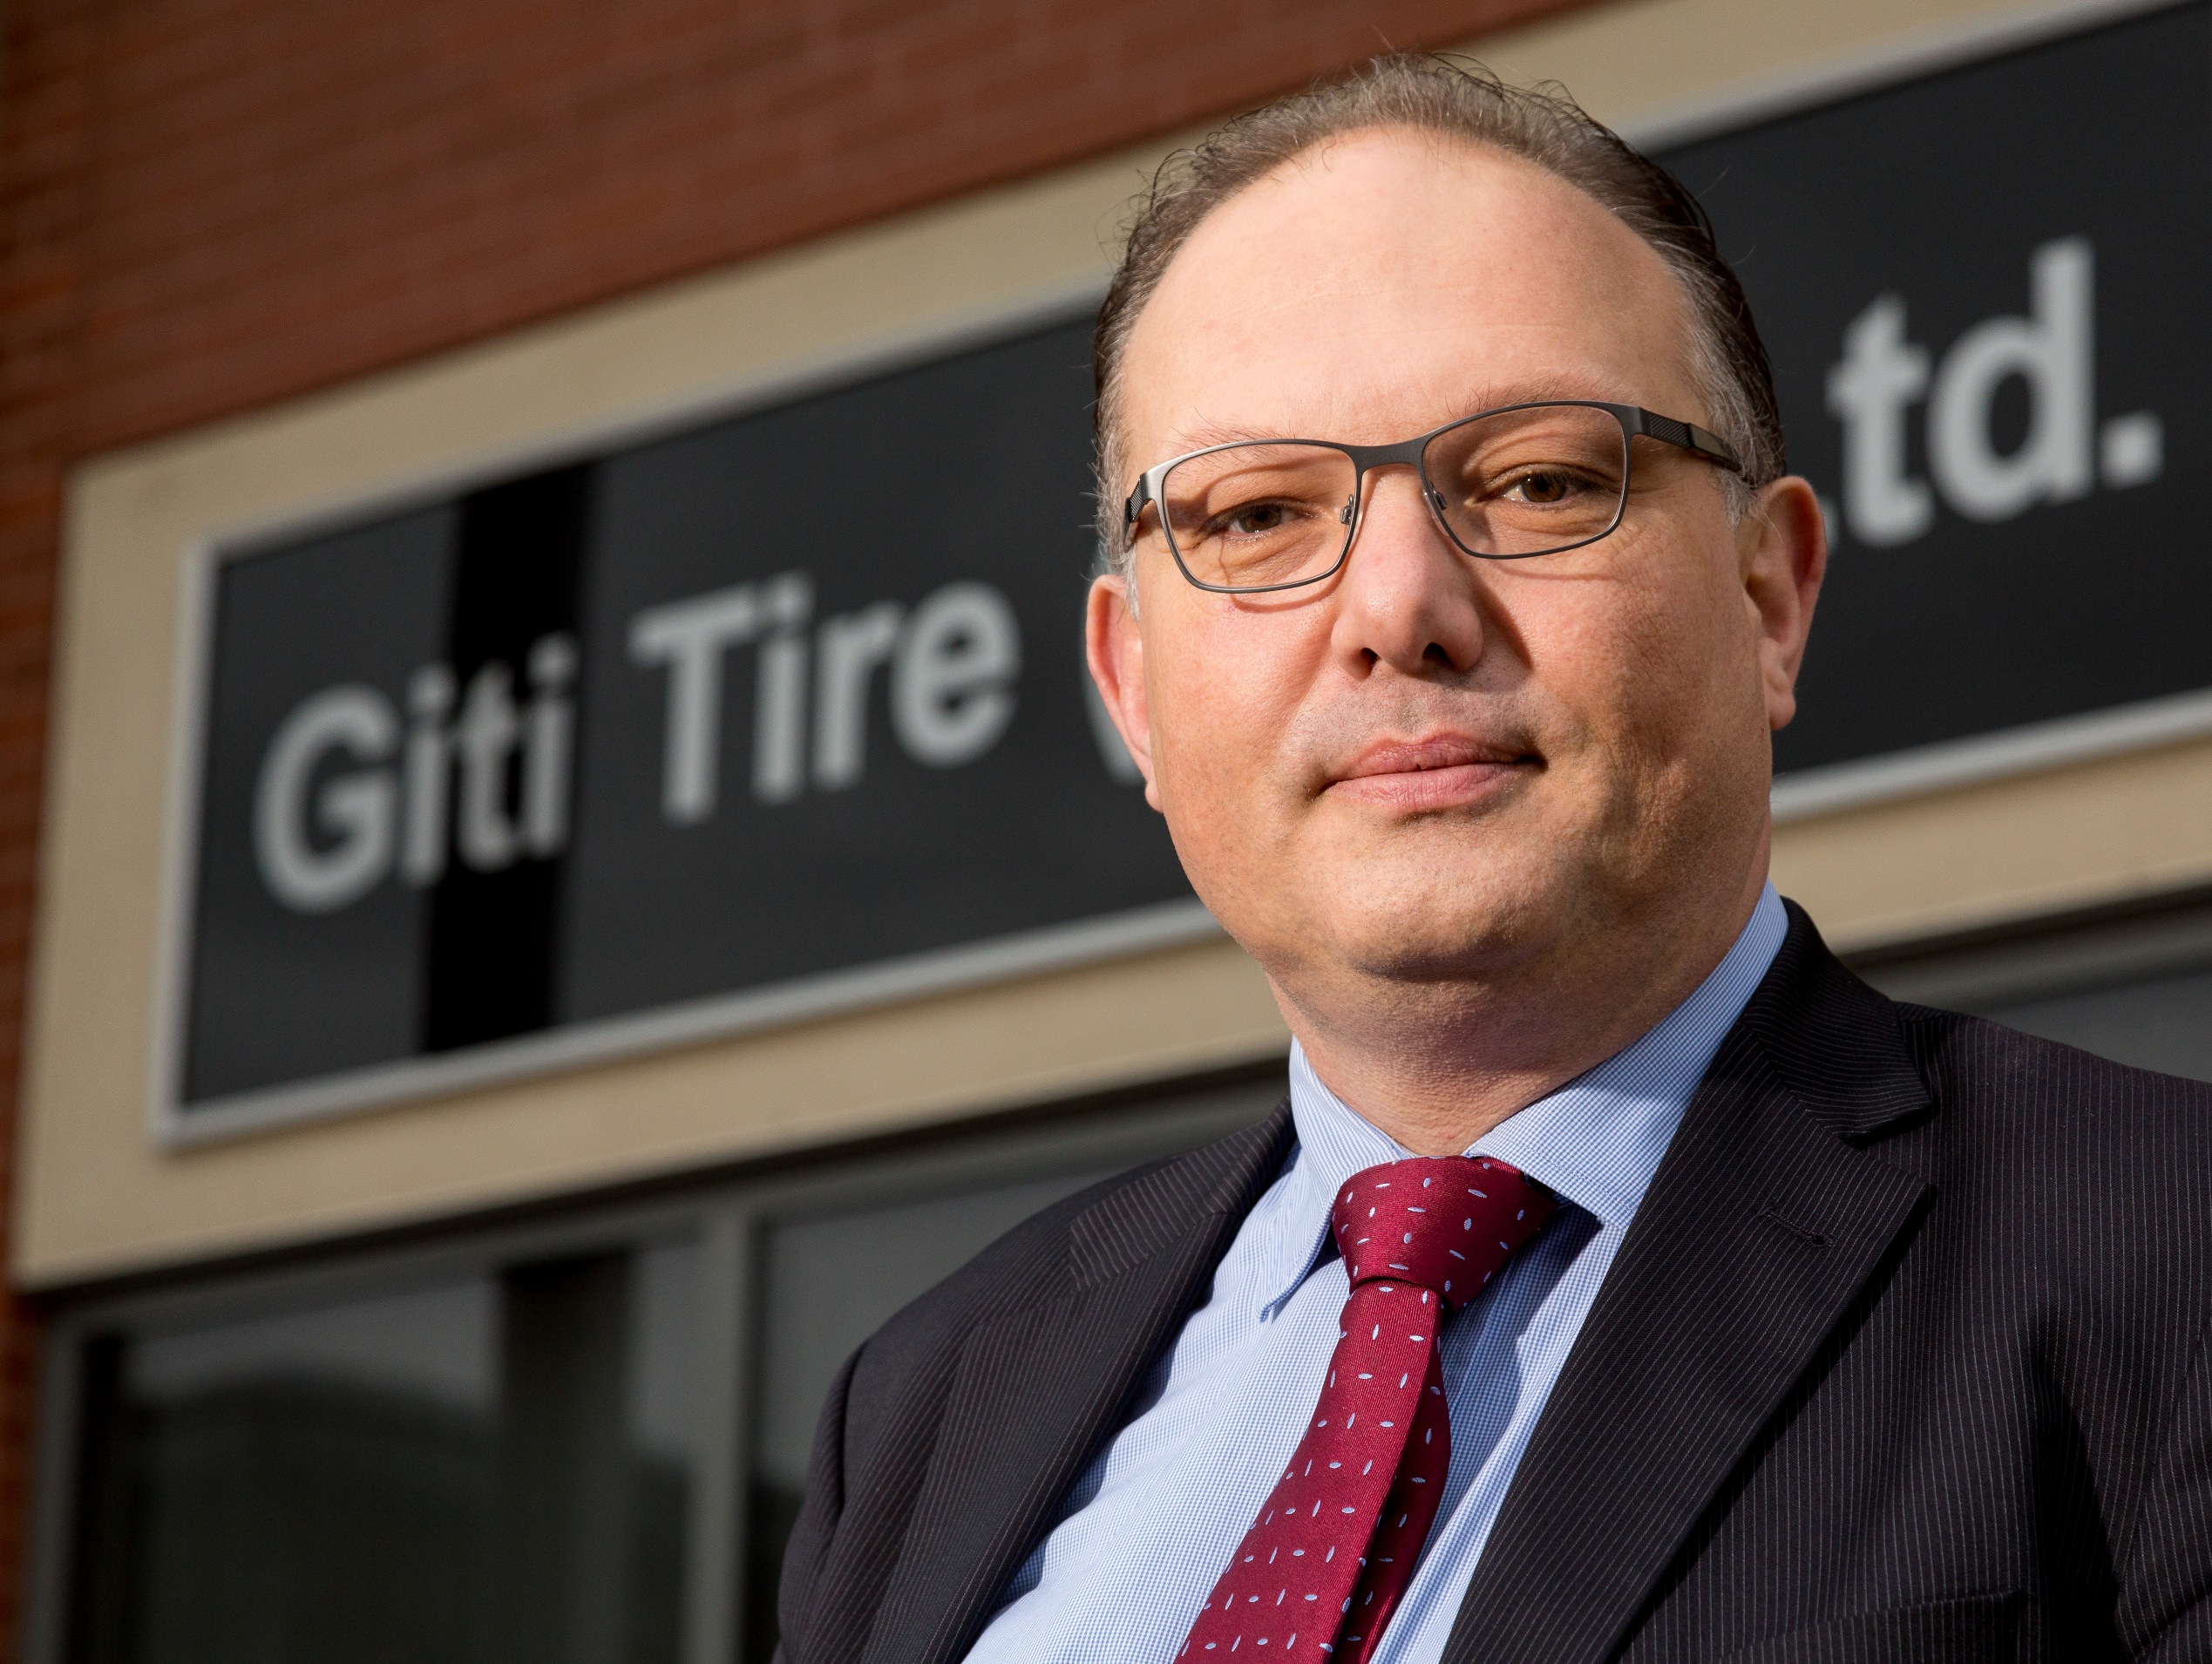 Giti: Rim sizes getting larger, and the UK is more ‘high-performance’ than many think